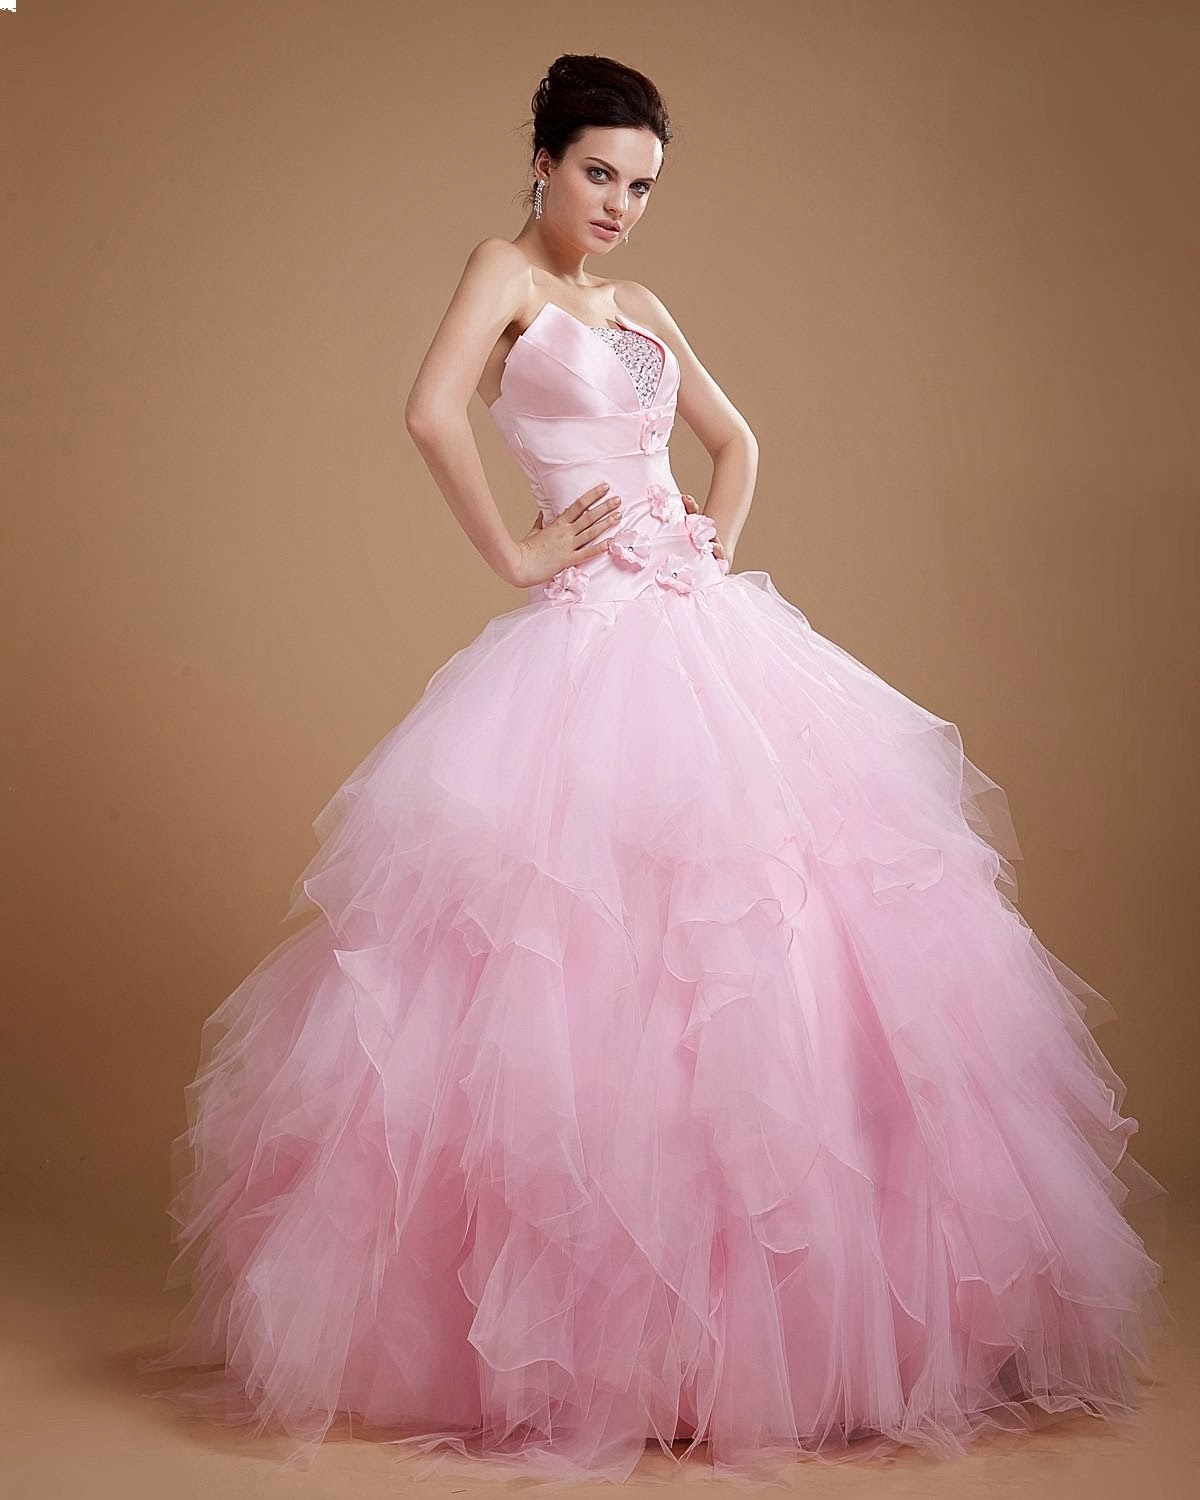 Top 3 Pink Prom Dresses Ball Gowns 2013 Prom Dresses Gowns Fashion